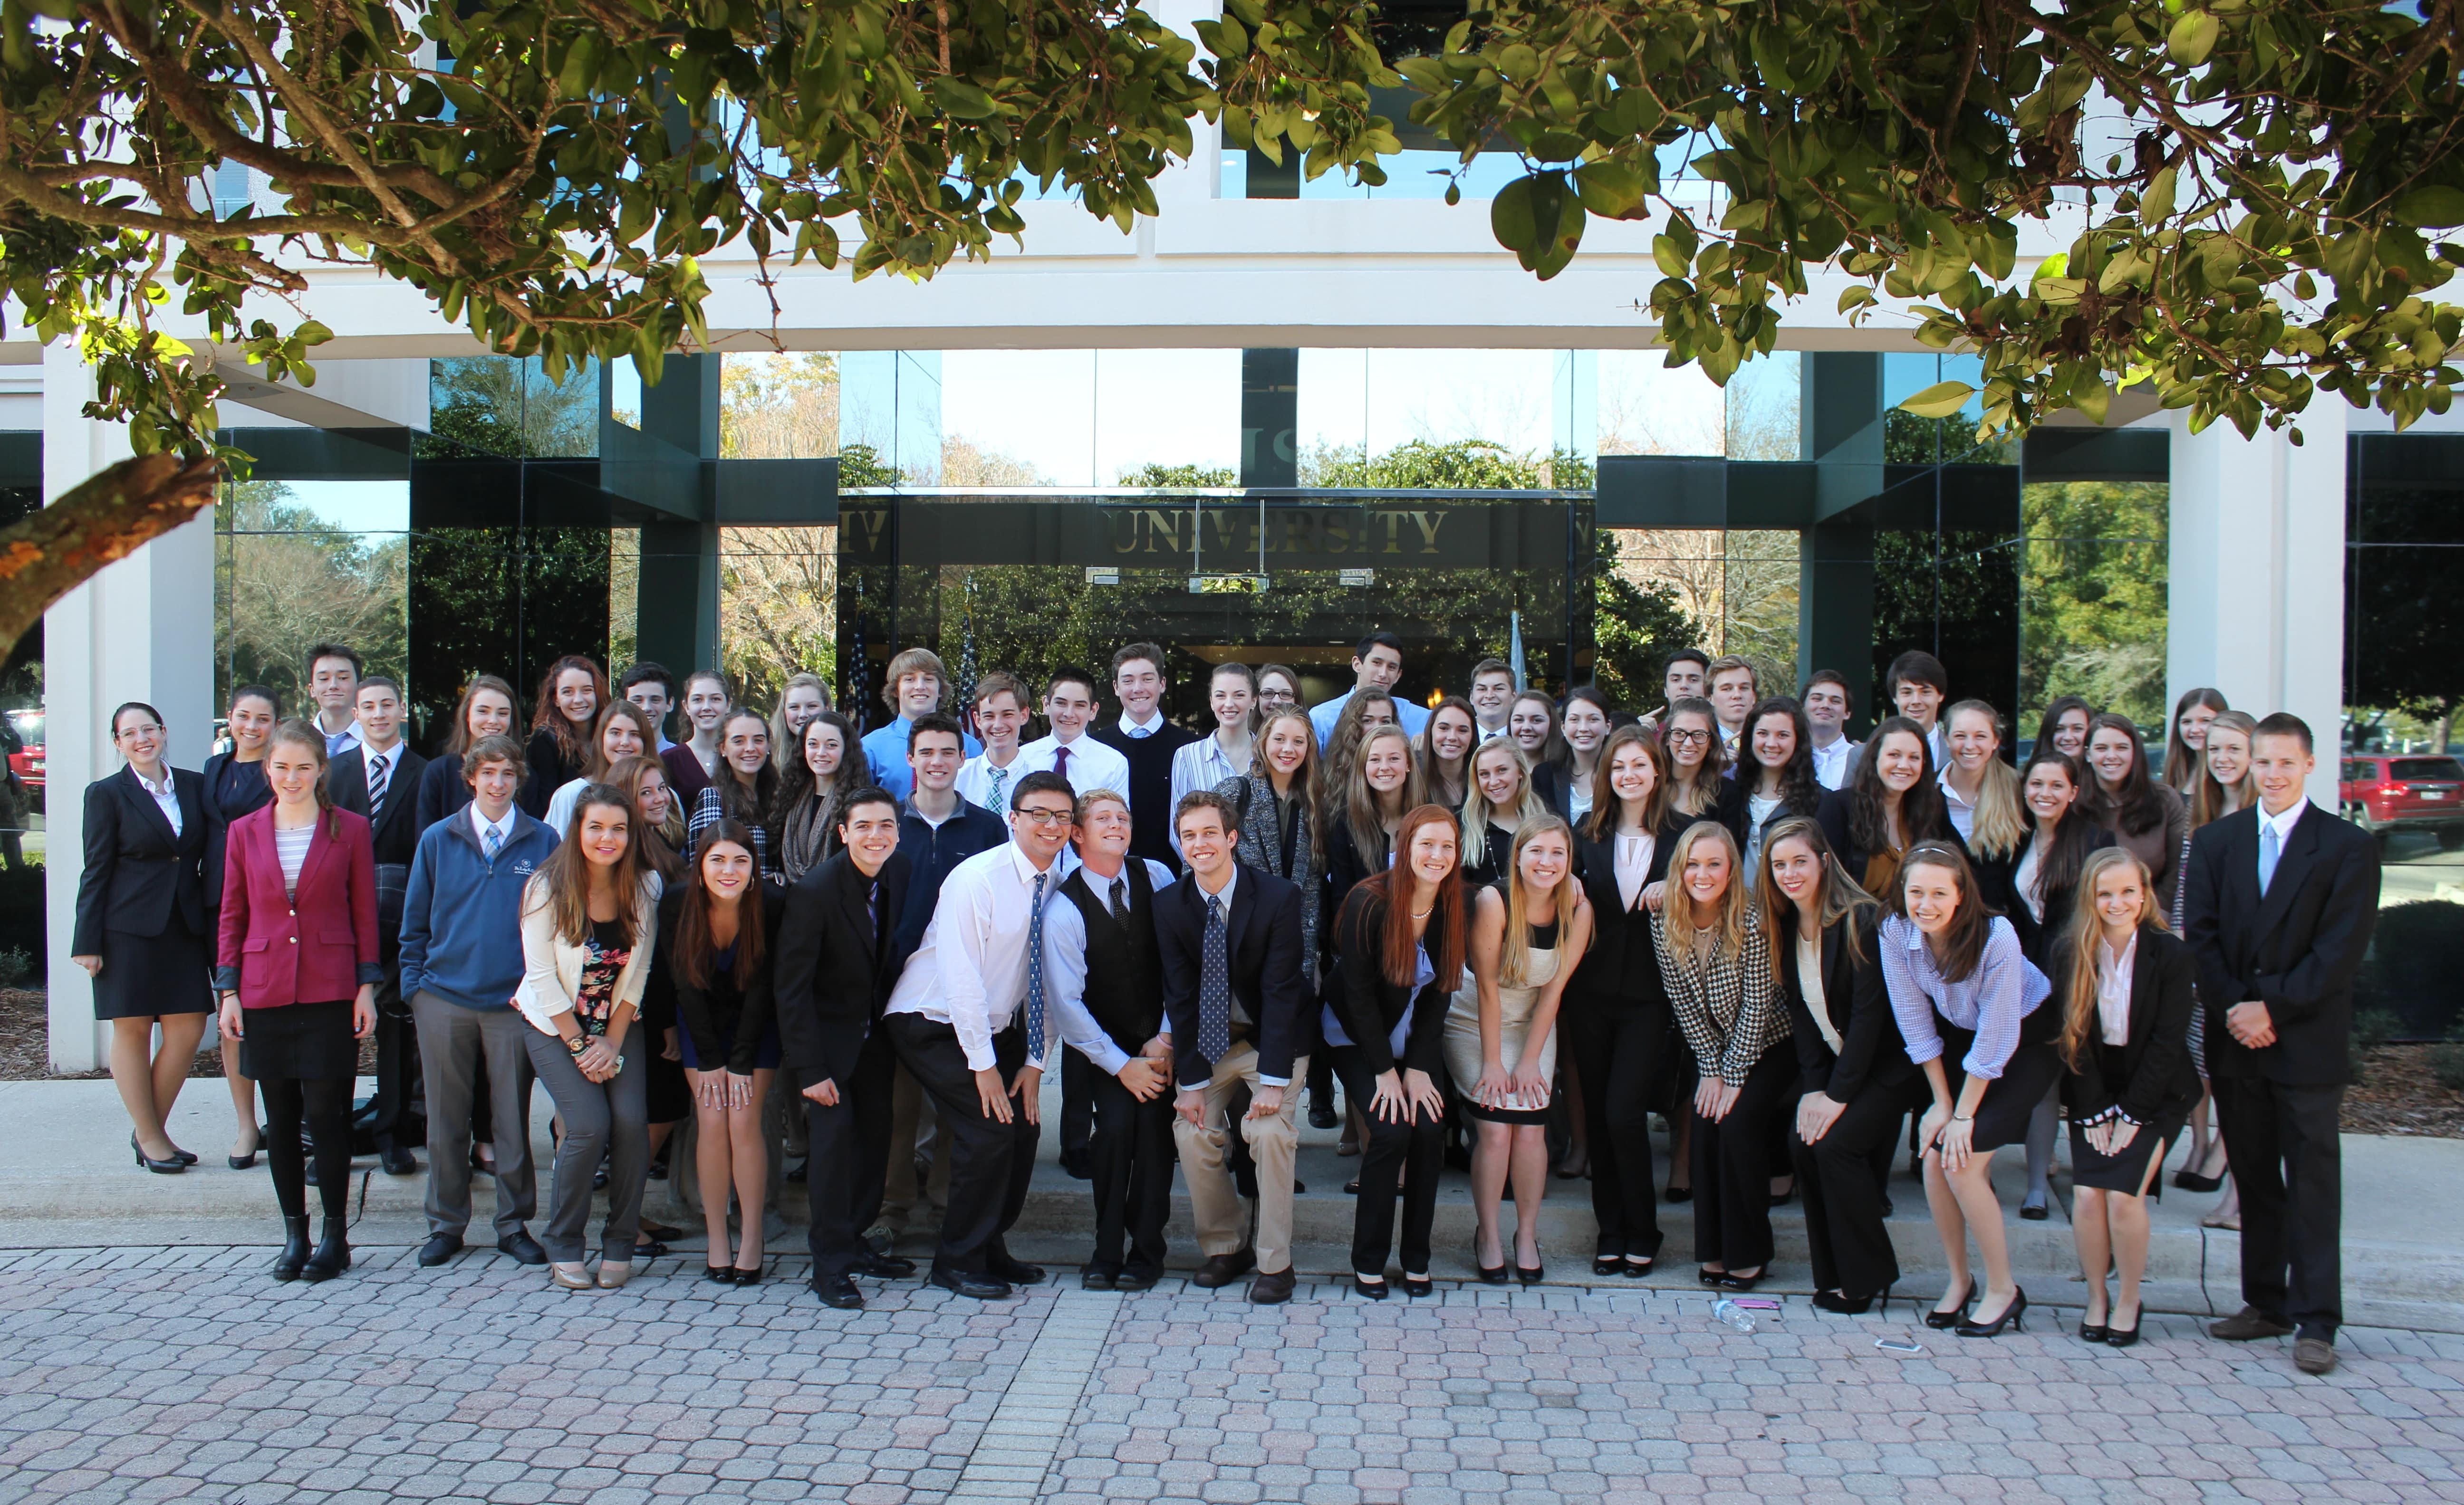 Jacksonville hosts the Future Business Leaders of America Competition